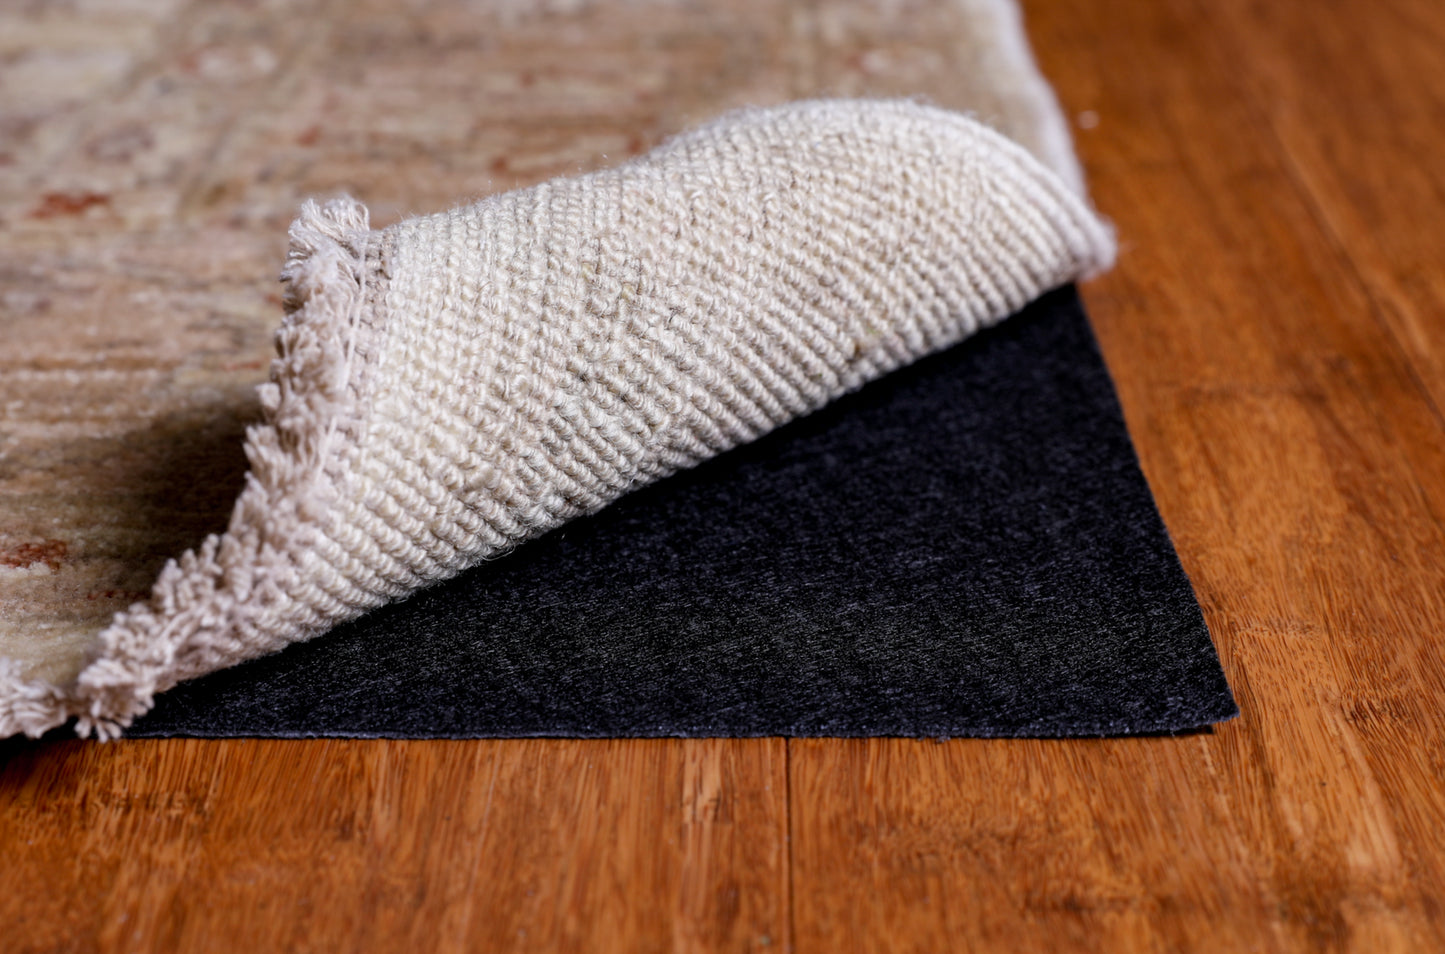  Grip-It Rug Pad Low-Profile Non-Slip Rug Pad for Area